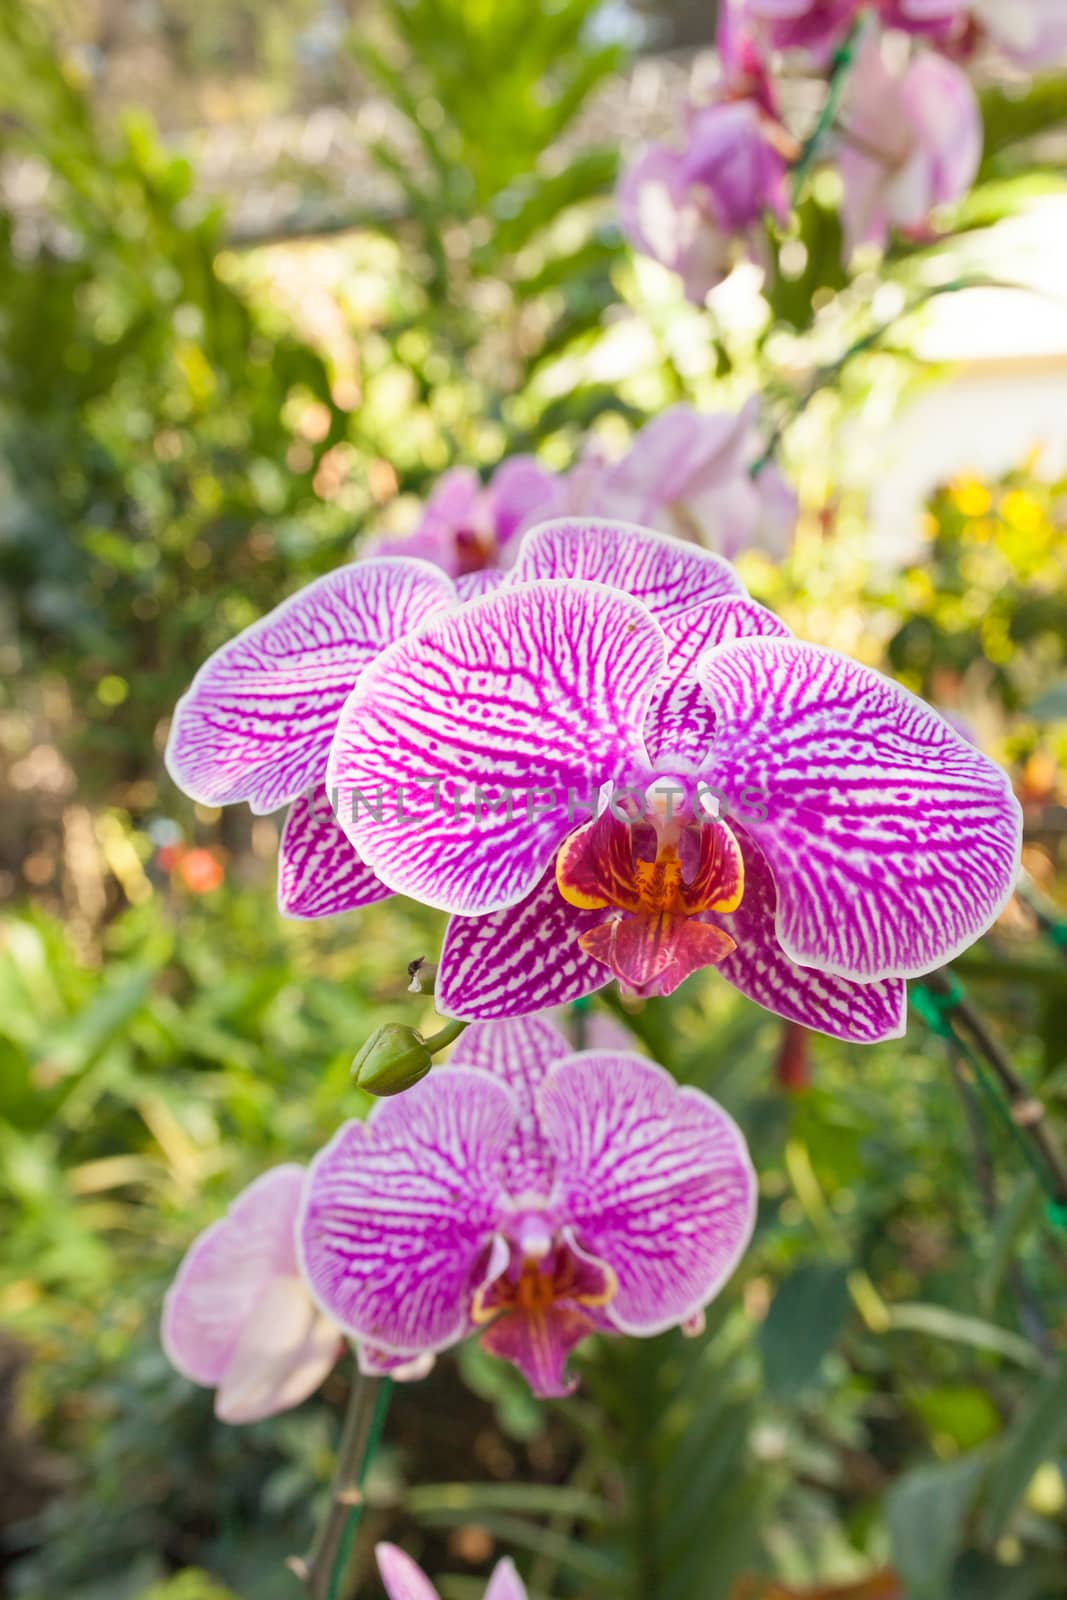 Orchid purple speckled The name of The flower due to similarity by nopparats